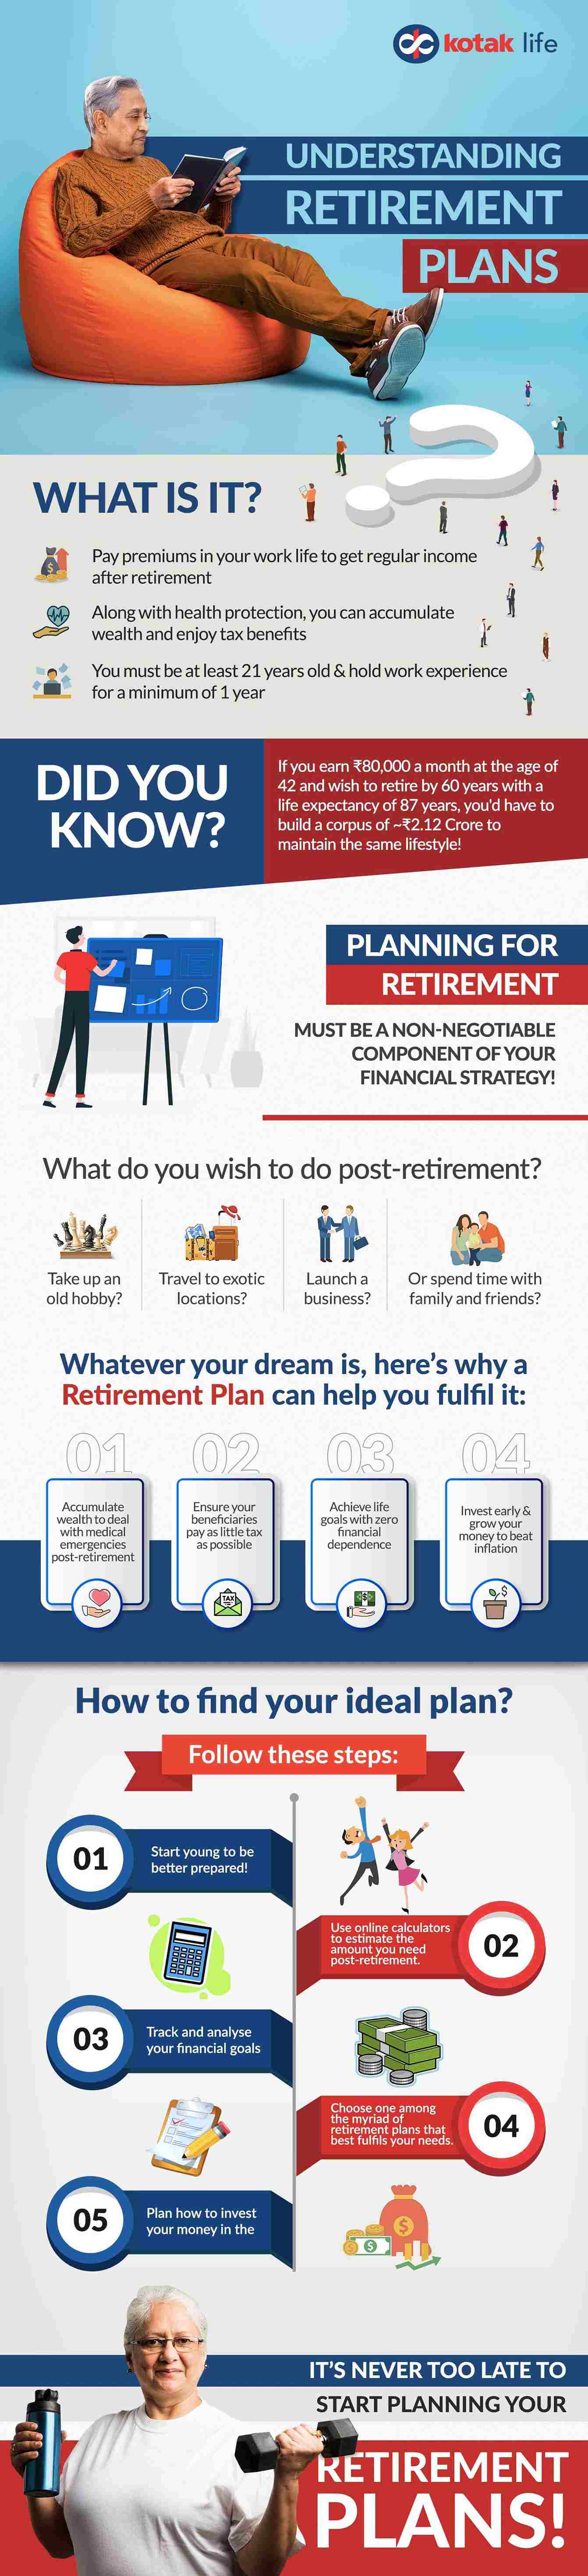 A Quick Guide to Retirement Plans